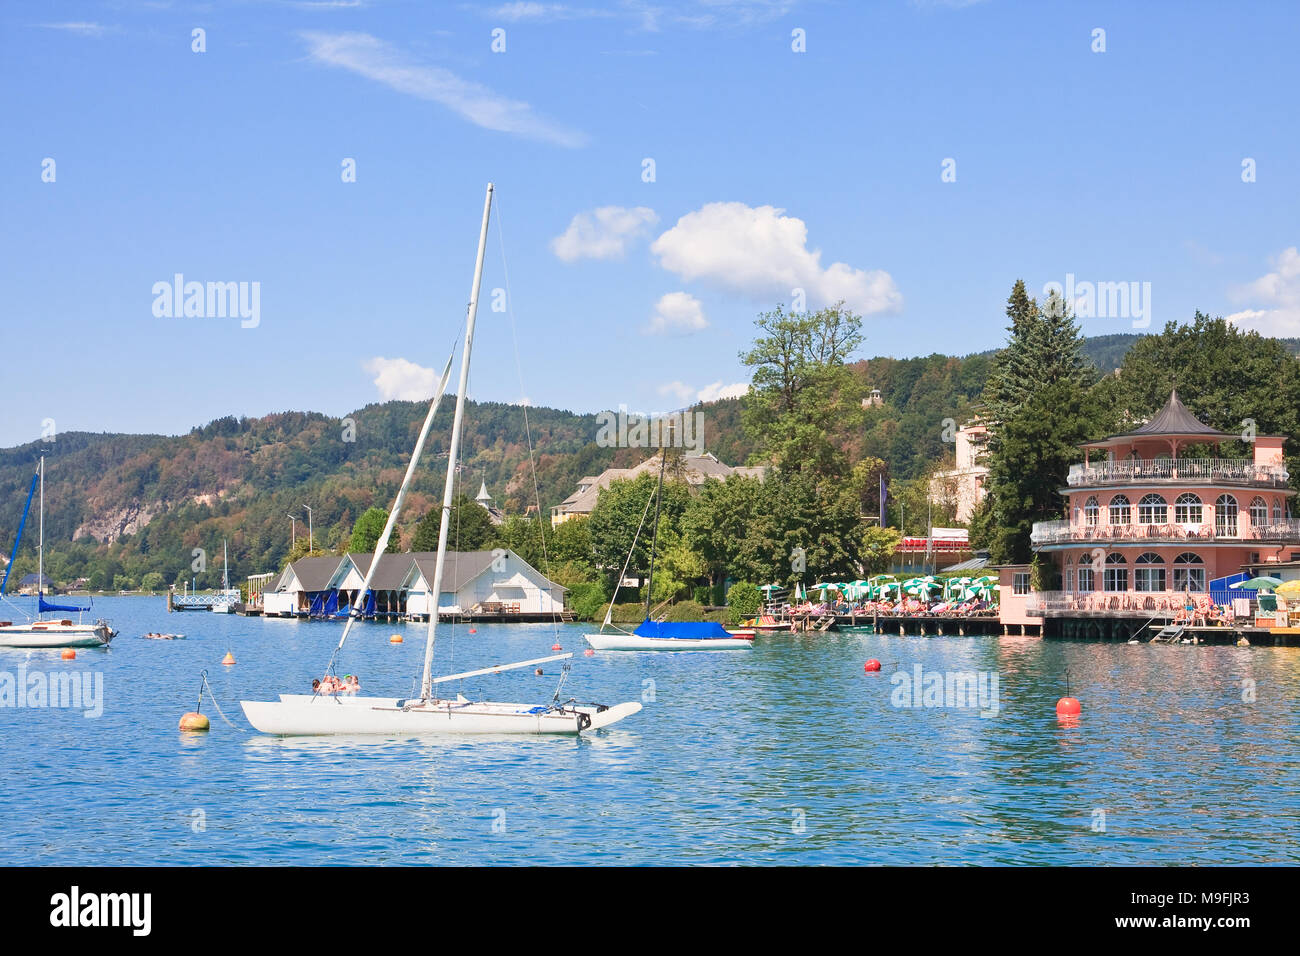 Resort Portschach am Worthersee and Lake Worth (Worthersee). Austria Stock Photo